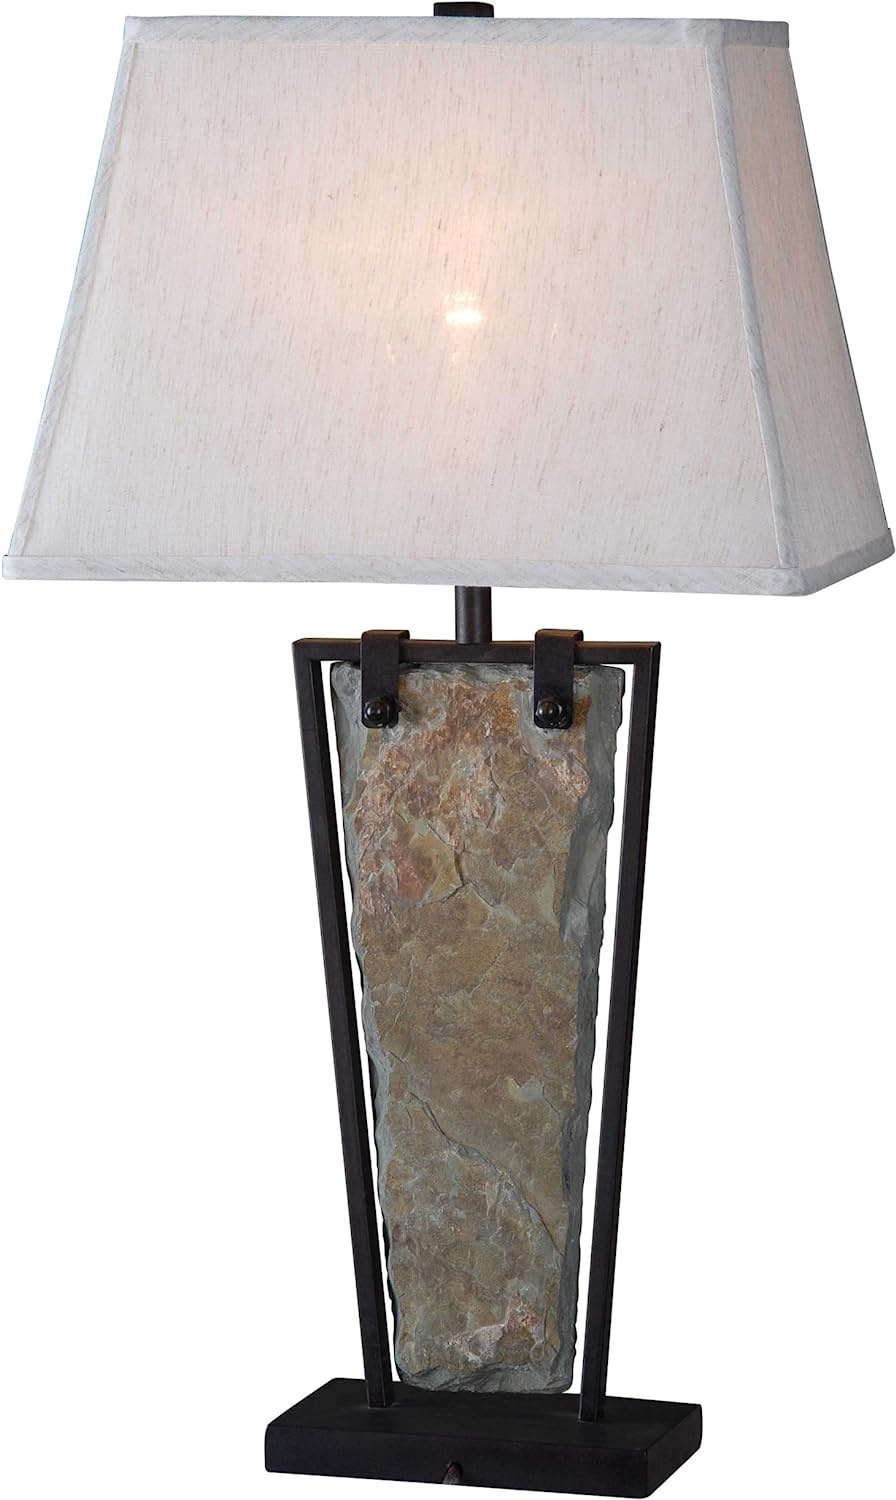 Kenroy Home 32227SL Free Fall Table Lamp with Natural Slate Finish, Rustic Style